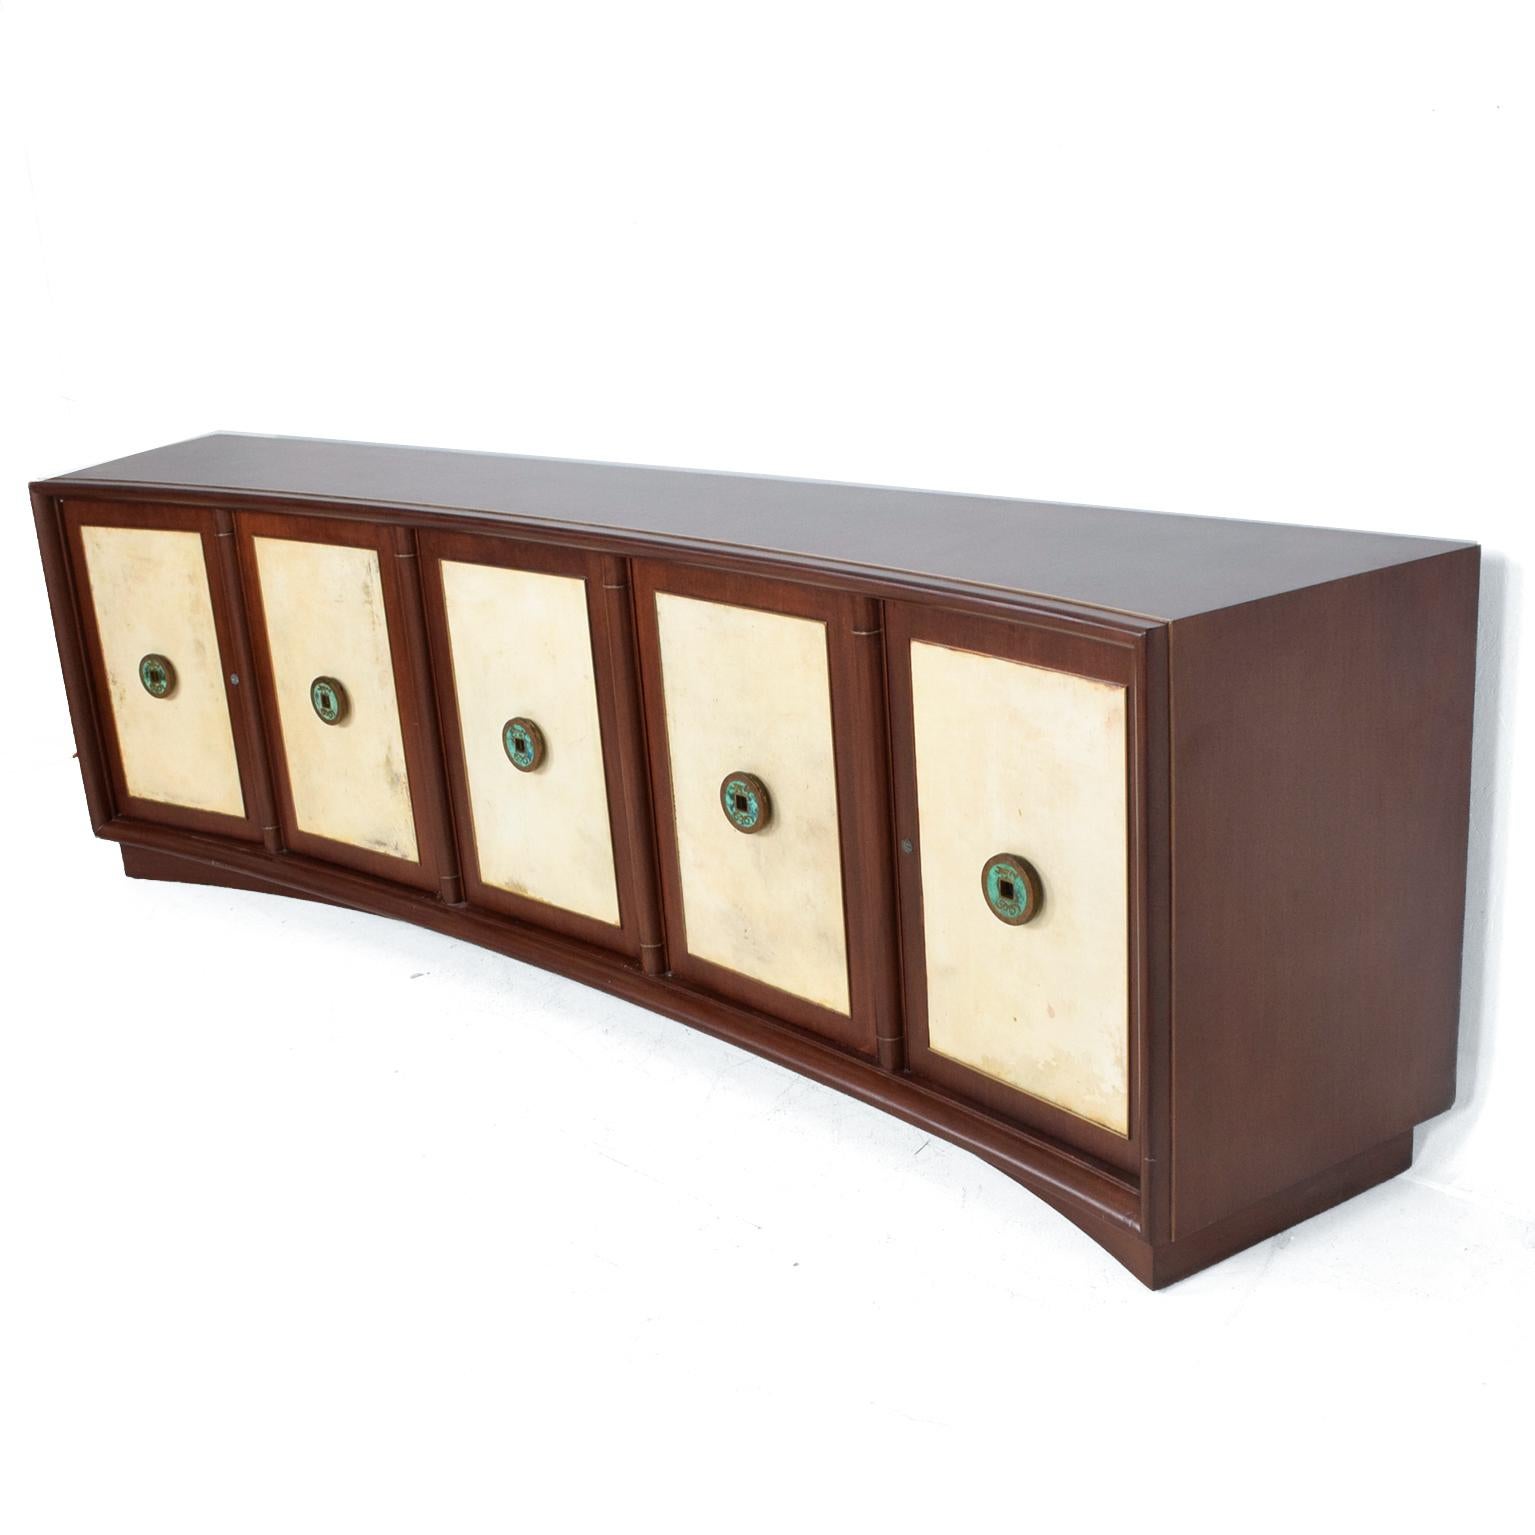 Credenza
Curved Credenza Cabinet in mahogany and goatskin Pepe Mendoza Malachite Pulls. Mexico circa 1950s Modernism.
Doors have original goatskin Malachite and Solid Brass Pulls by Pepe Mendoza. 
Credenza has five cabinets. Right side has four